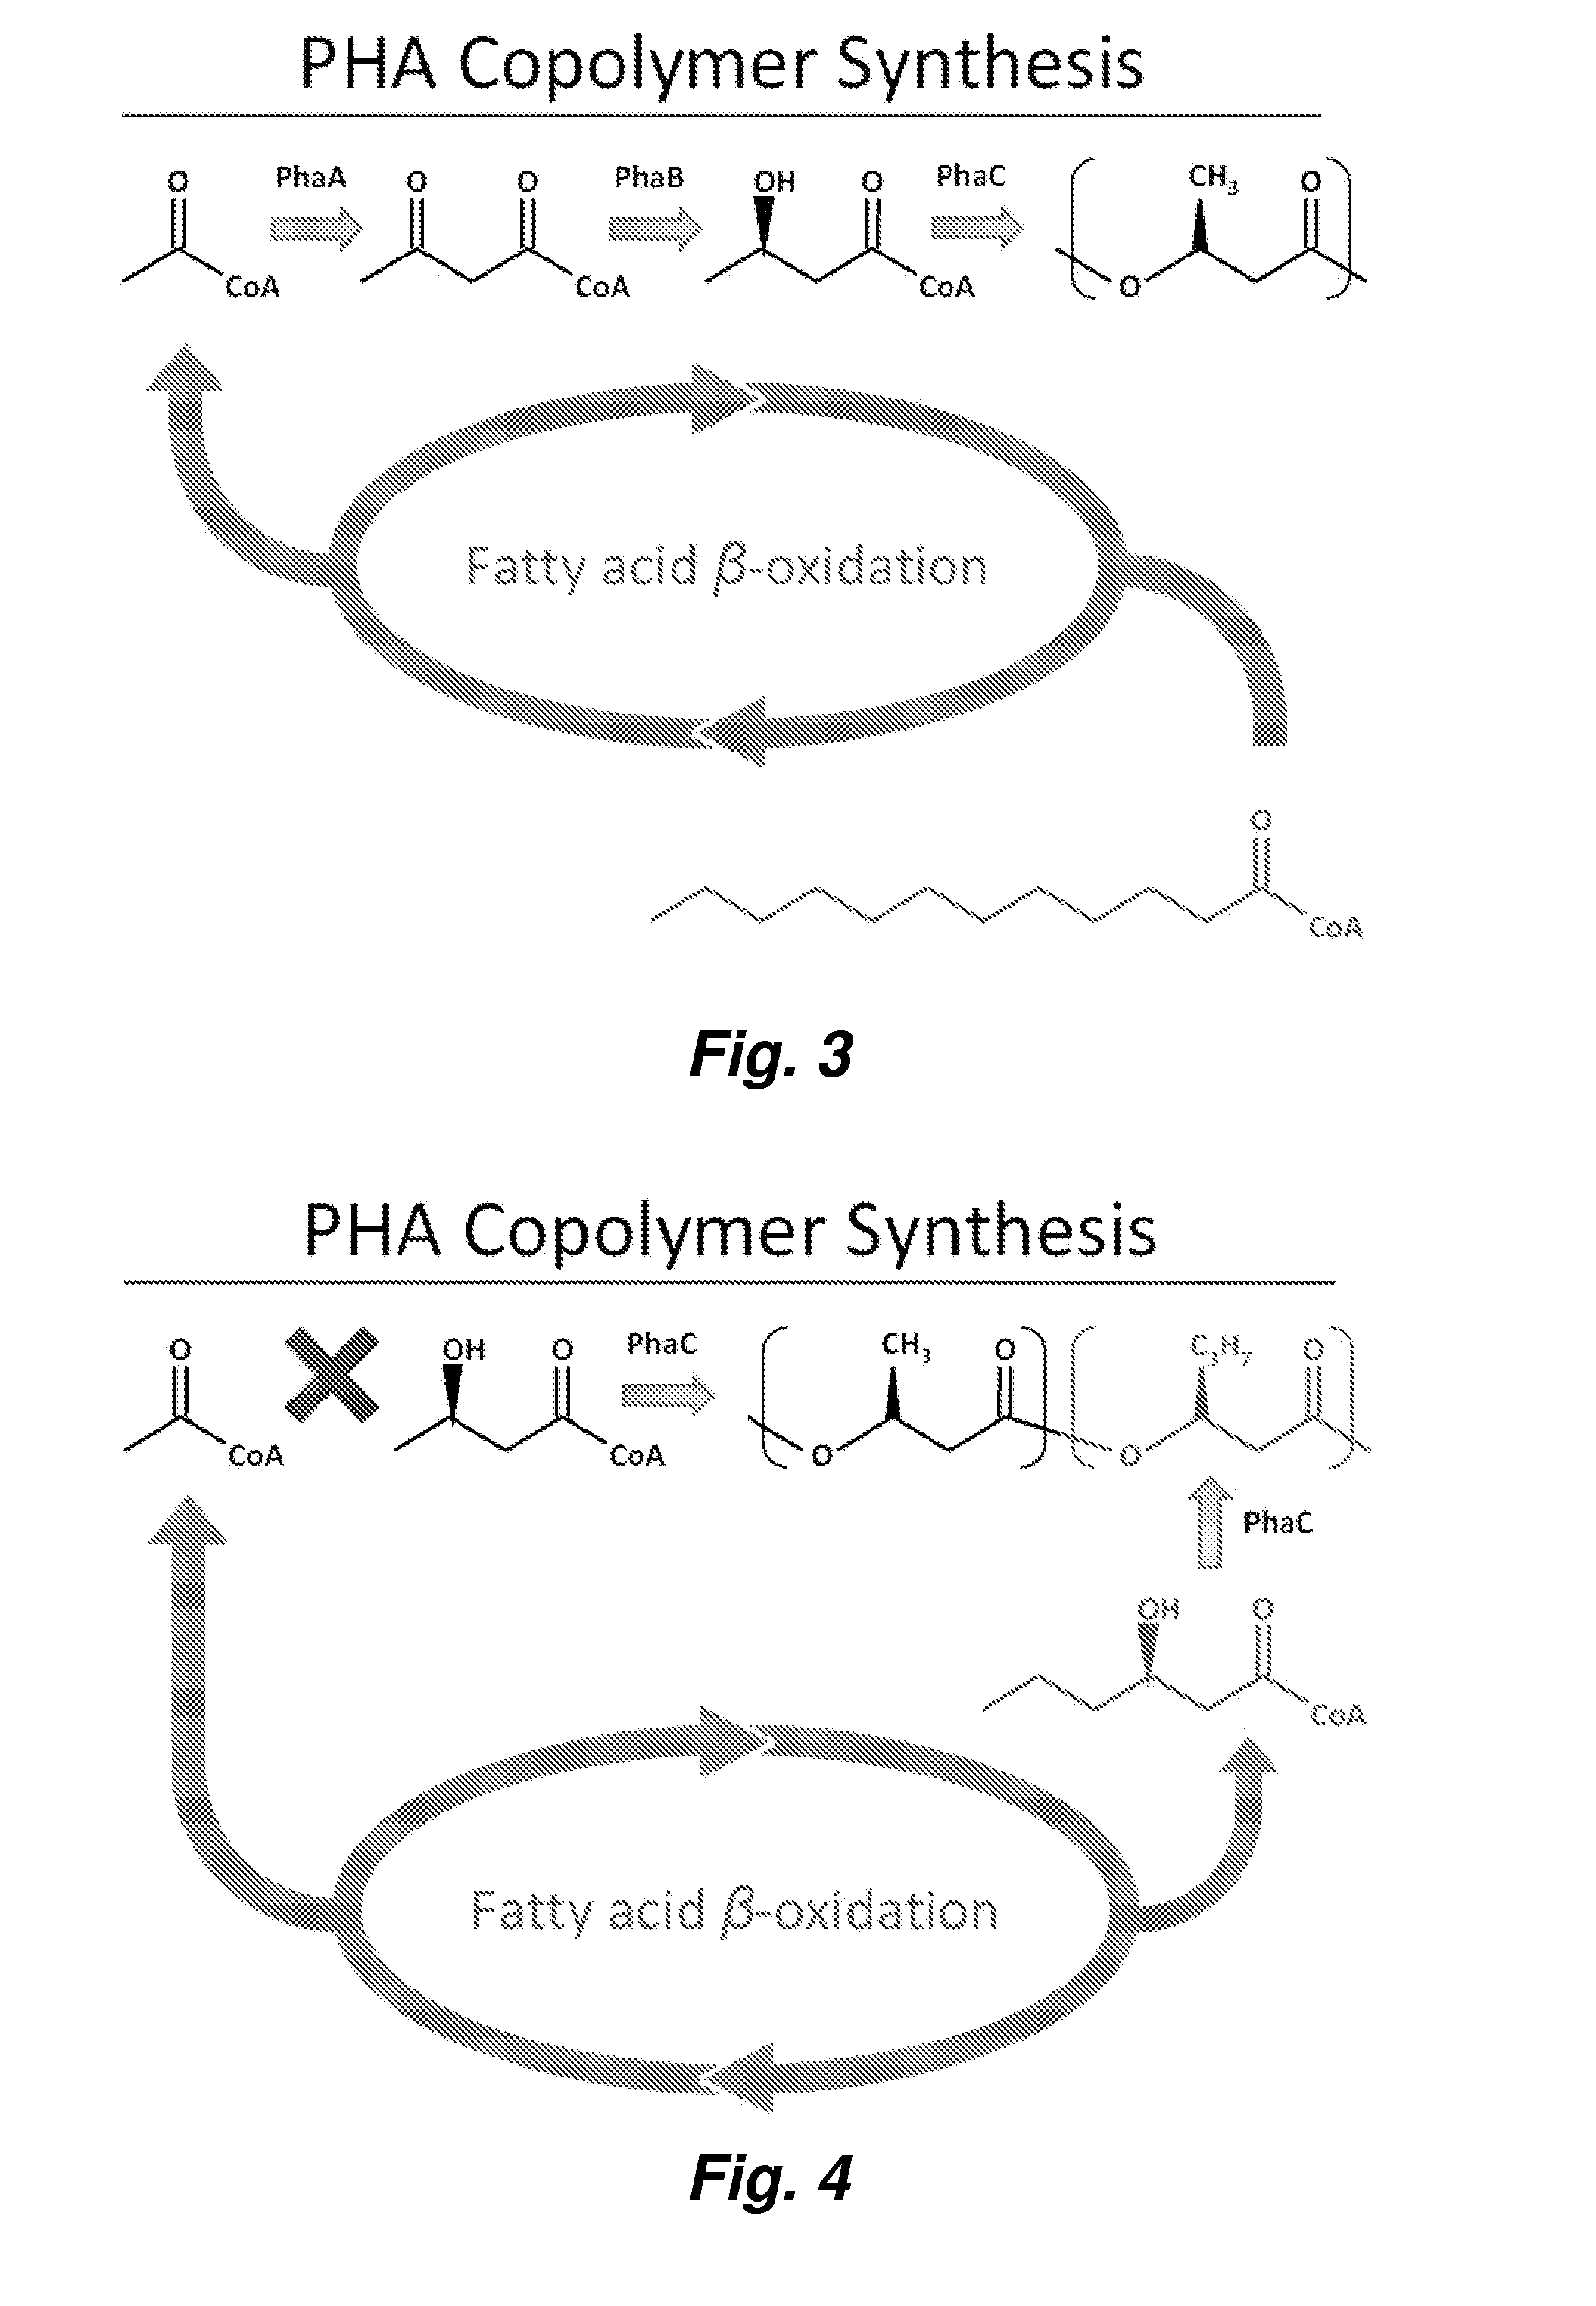 Methods for producing polyhydroxyalkanoate copolymer with high medium chain length monomer content